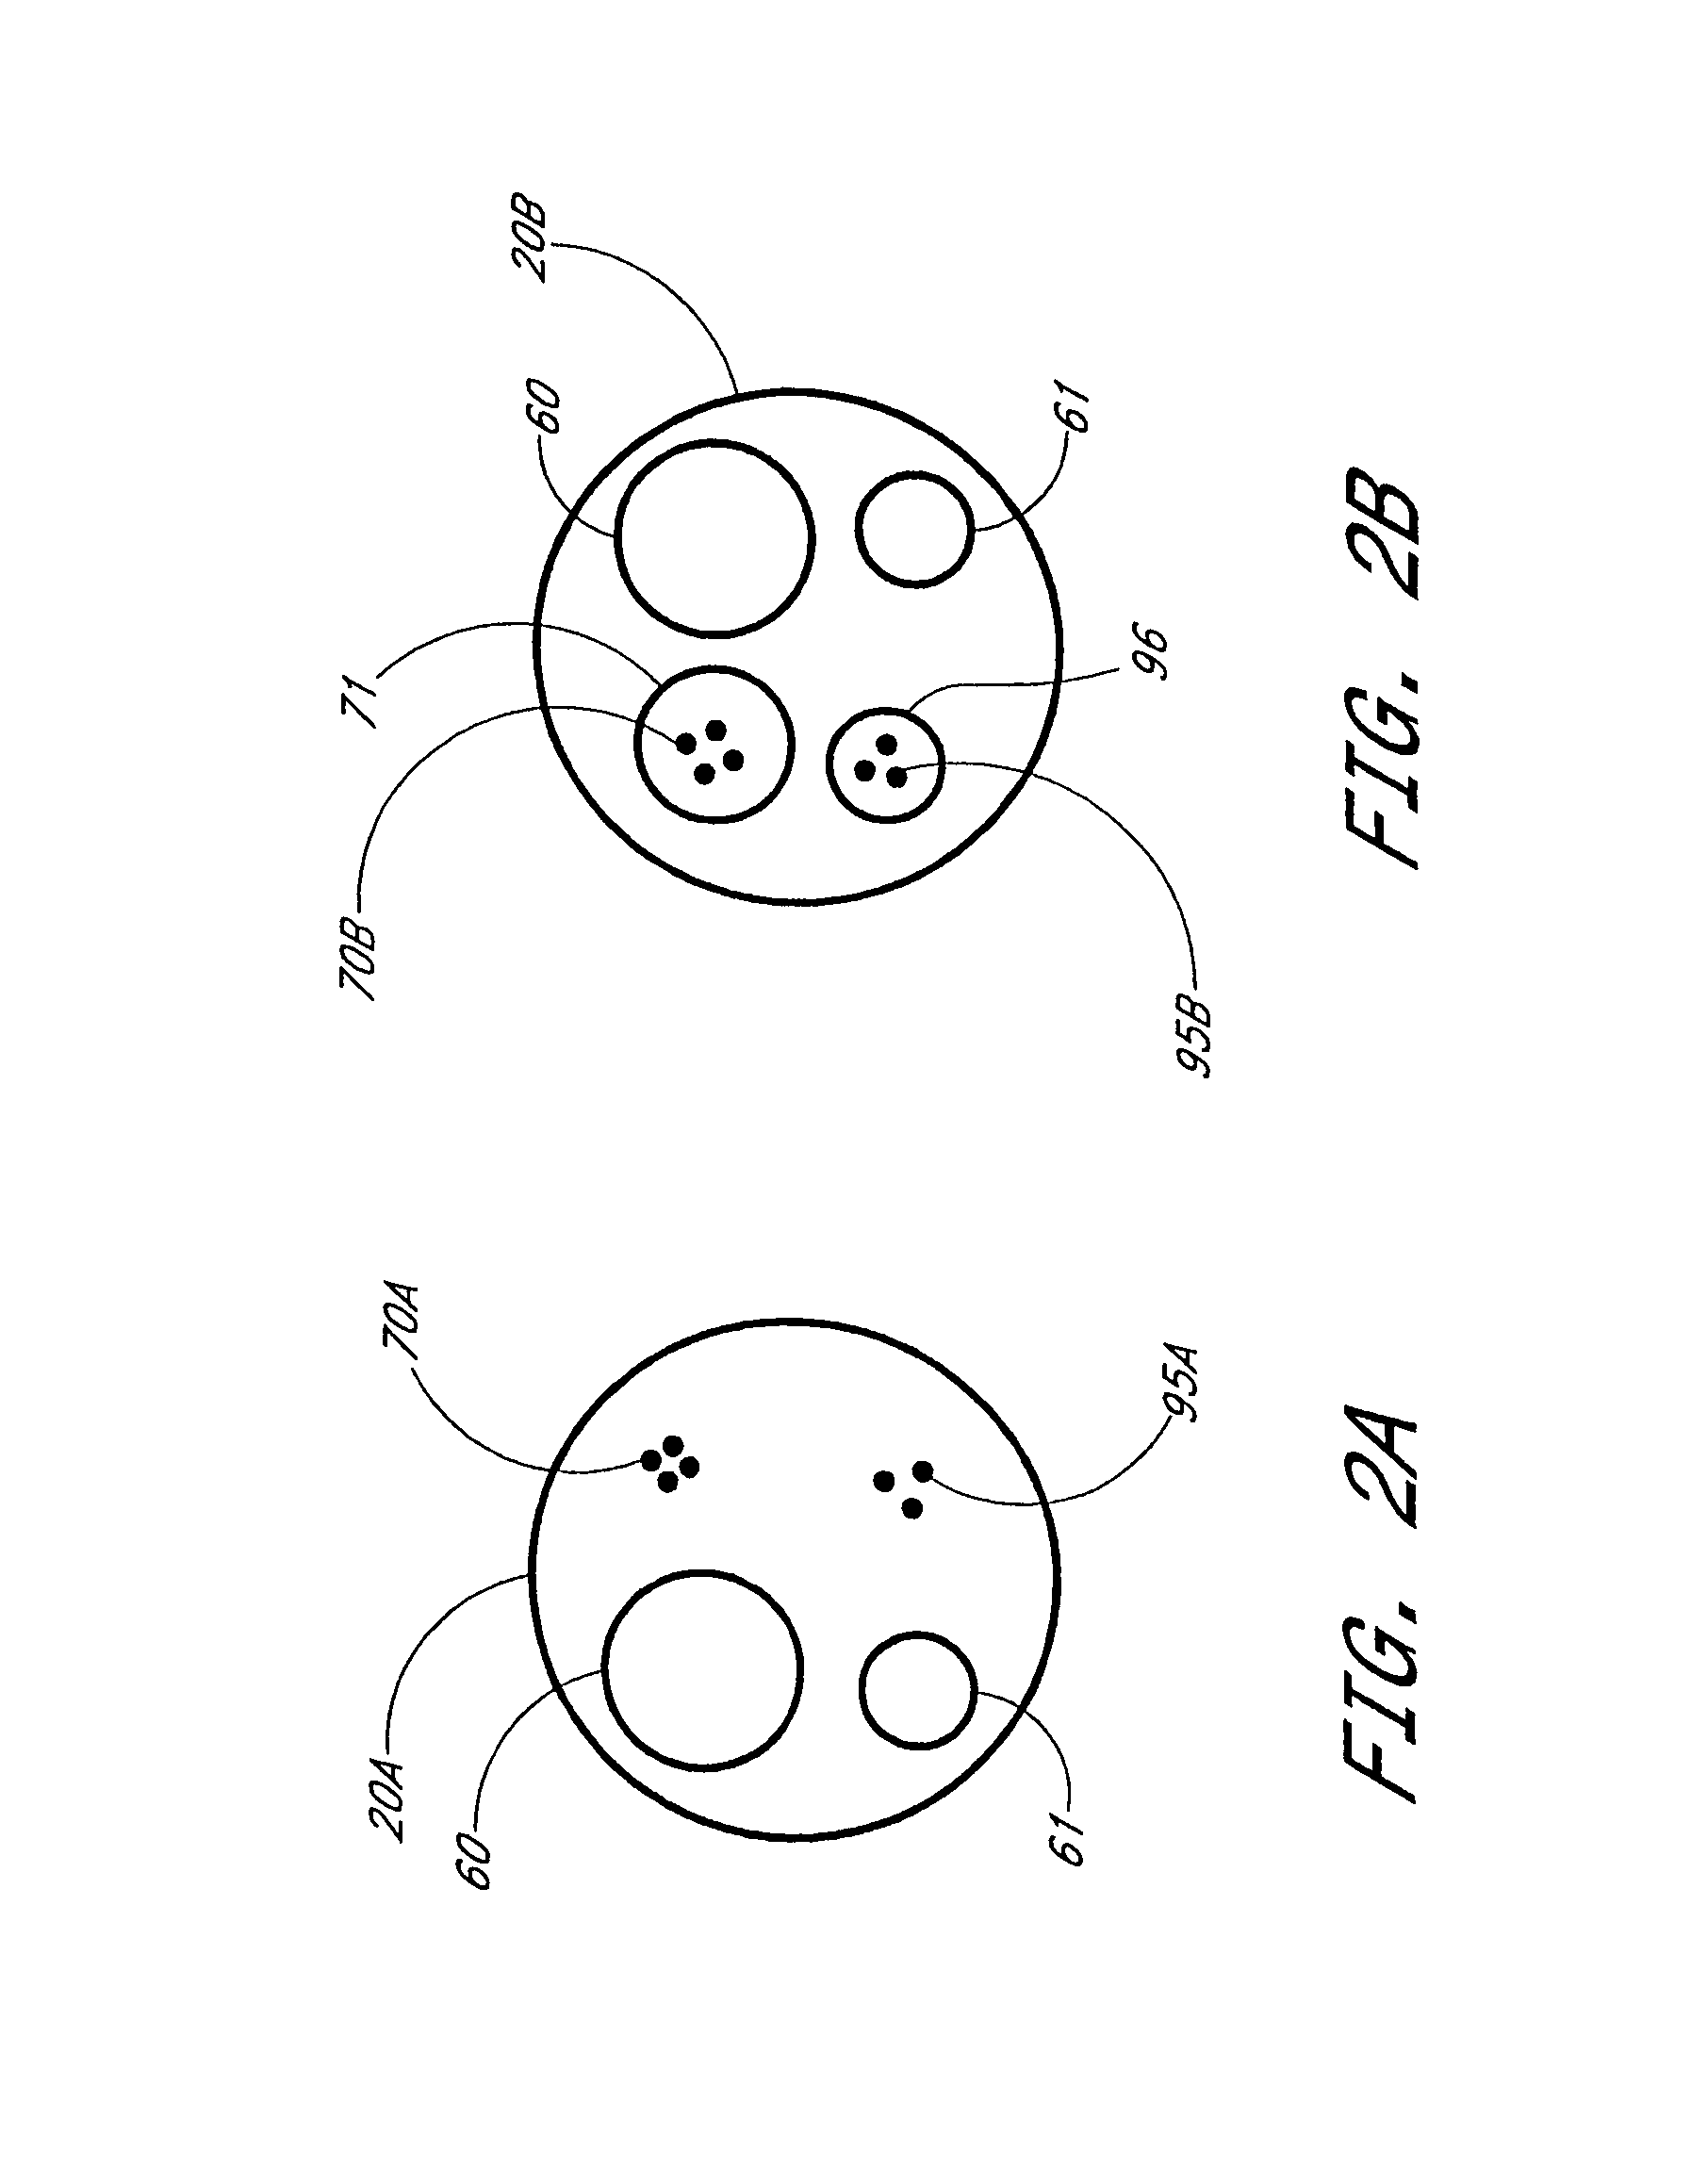 System and method for measuring cross-sectional areas and pressure gradients in luminal organs